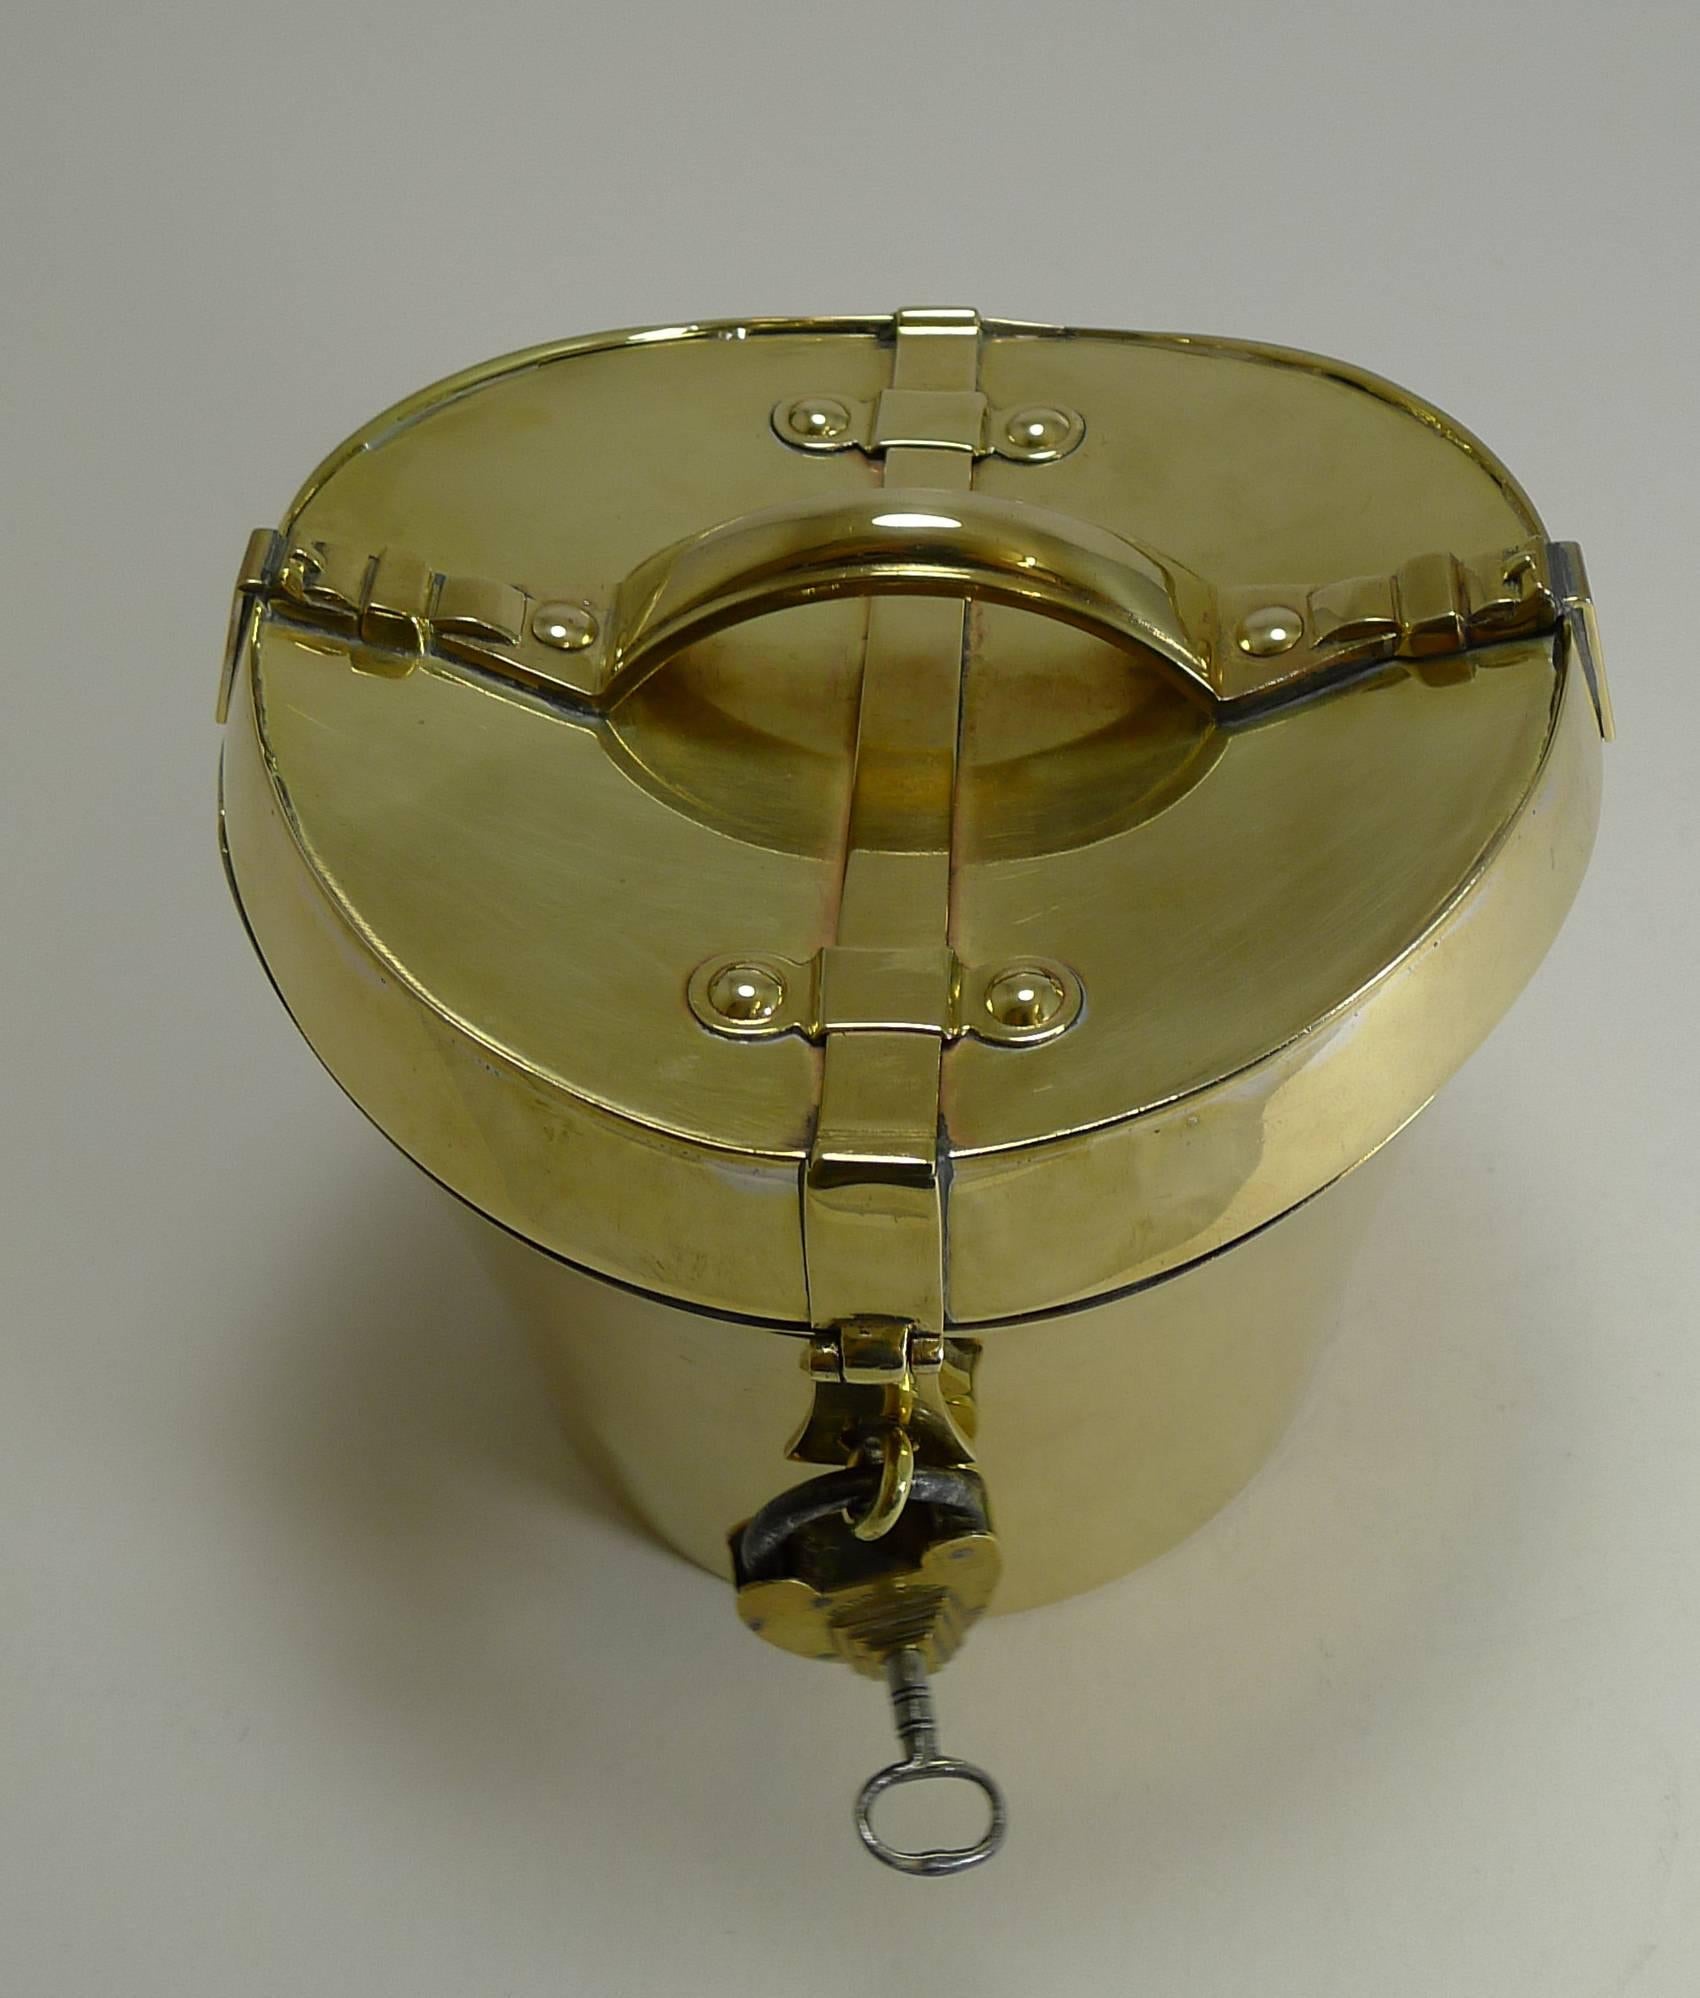 A highly sought-after and collectable brass biscuit box in the form of a Hat Box with an integral handle to the top and belt and buckle detail to either side just like a leather hat box.

The front has a working padlock and key and once opened the